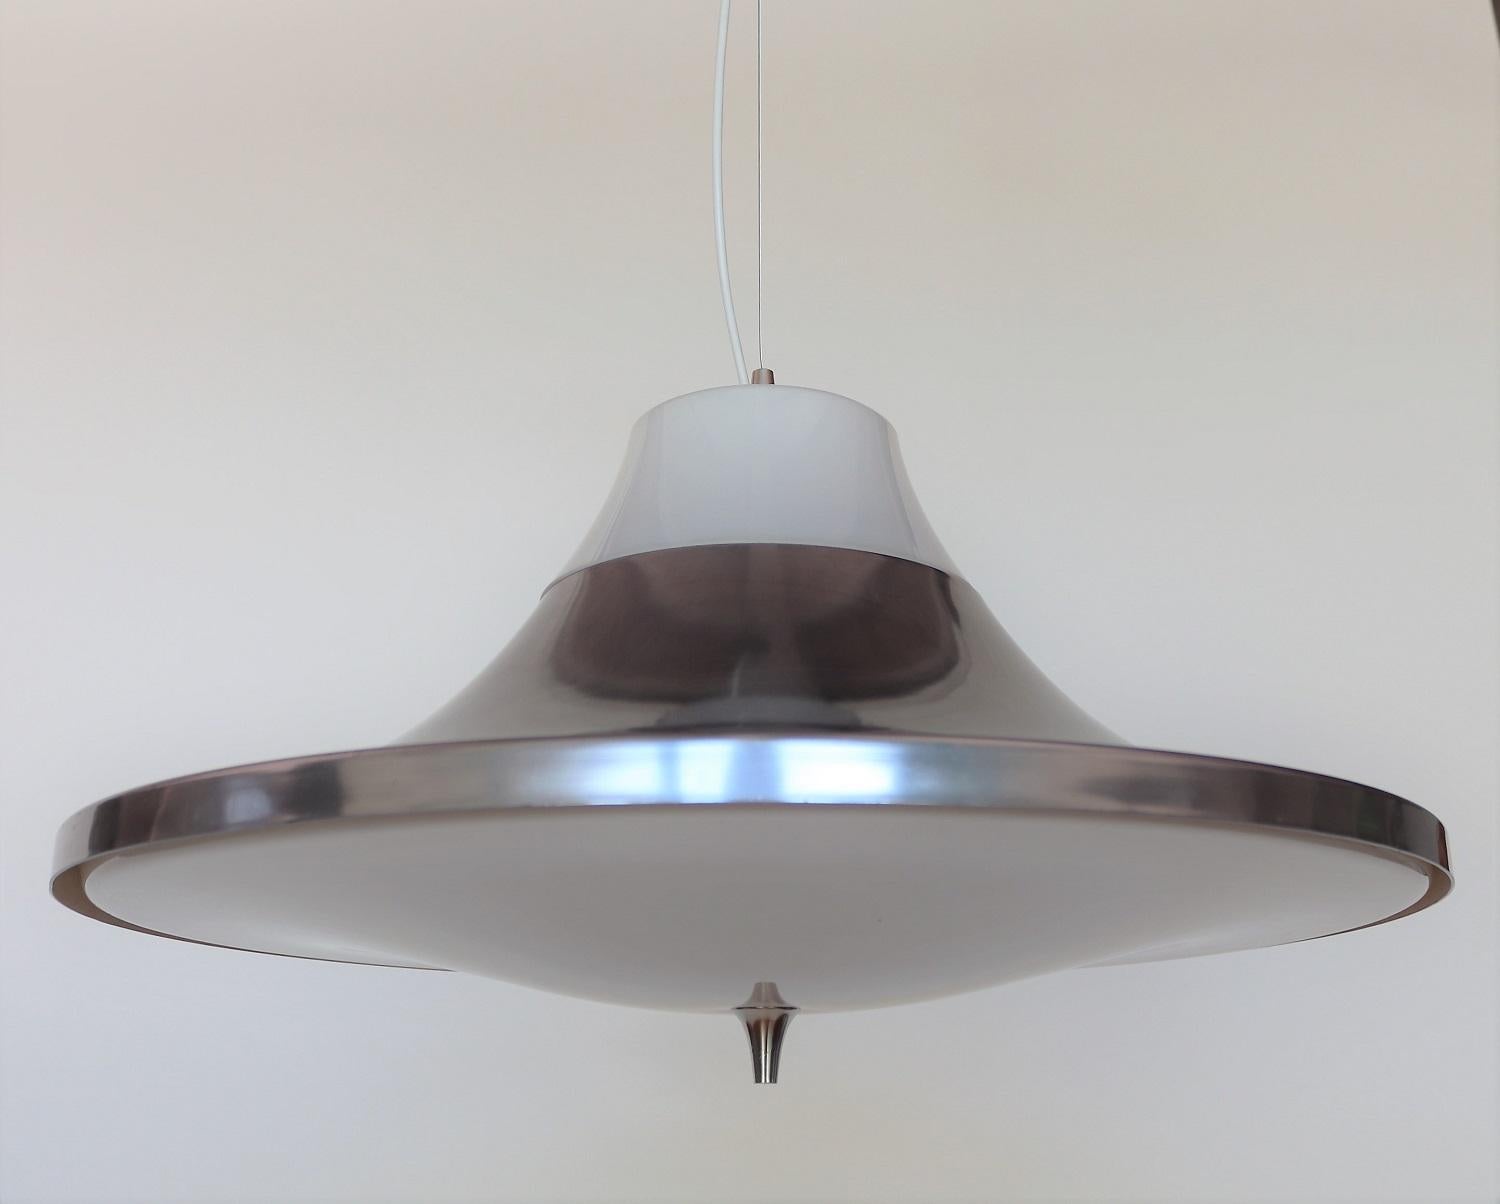 Gorgeous Italian pendant lamp made of Acrylic and Aluminum during the Mid-Century Modern period in Italy, 1960s.
All lamp's parts are in very good condition with no structural defects.
It has a quite big diameter and is perfect for a big round